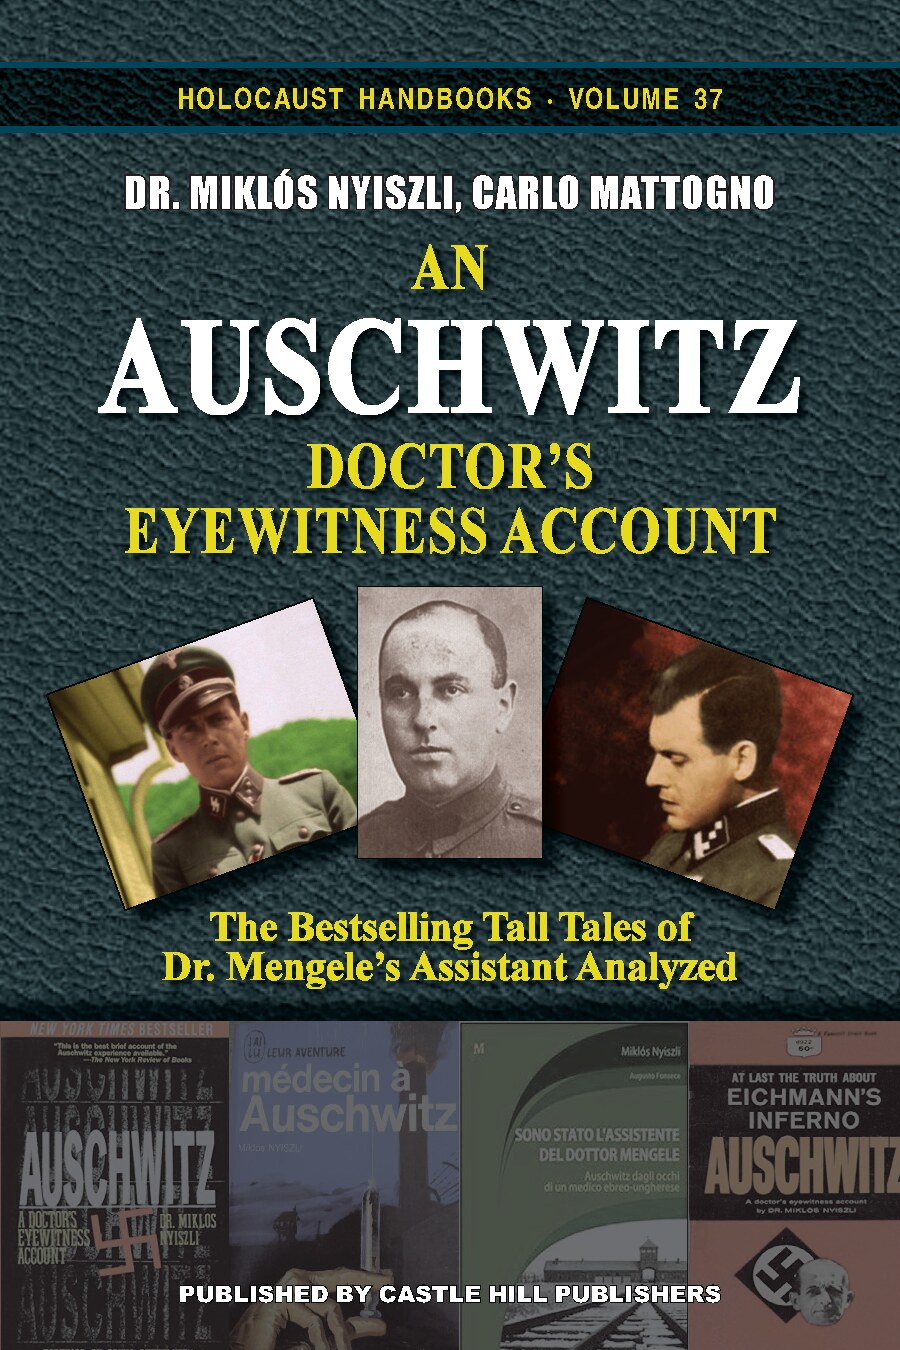 An Auschwitz Doctor’s Eyewitness Account: The Bestselling Tall Tales of Dr. Mengele’s Assistant Analyzed